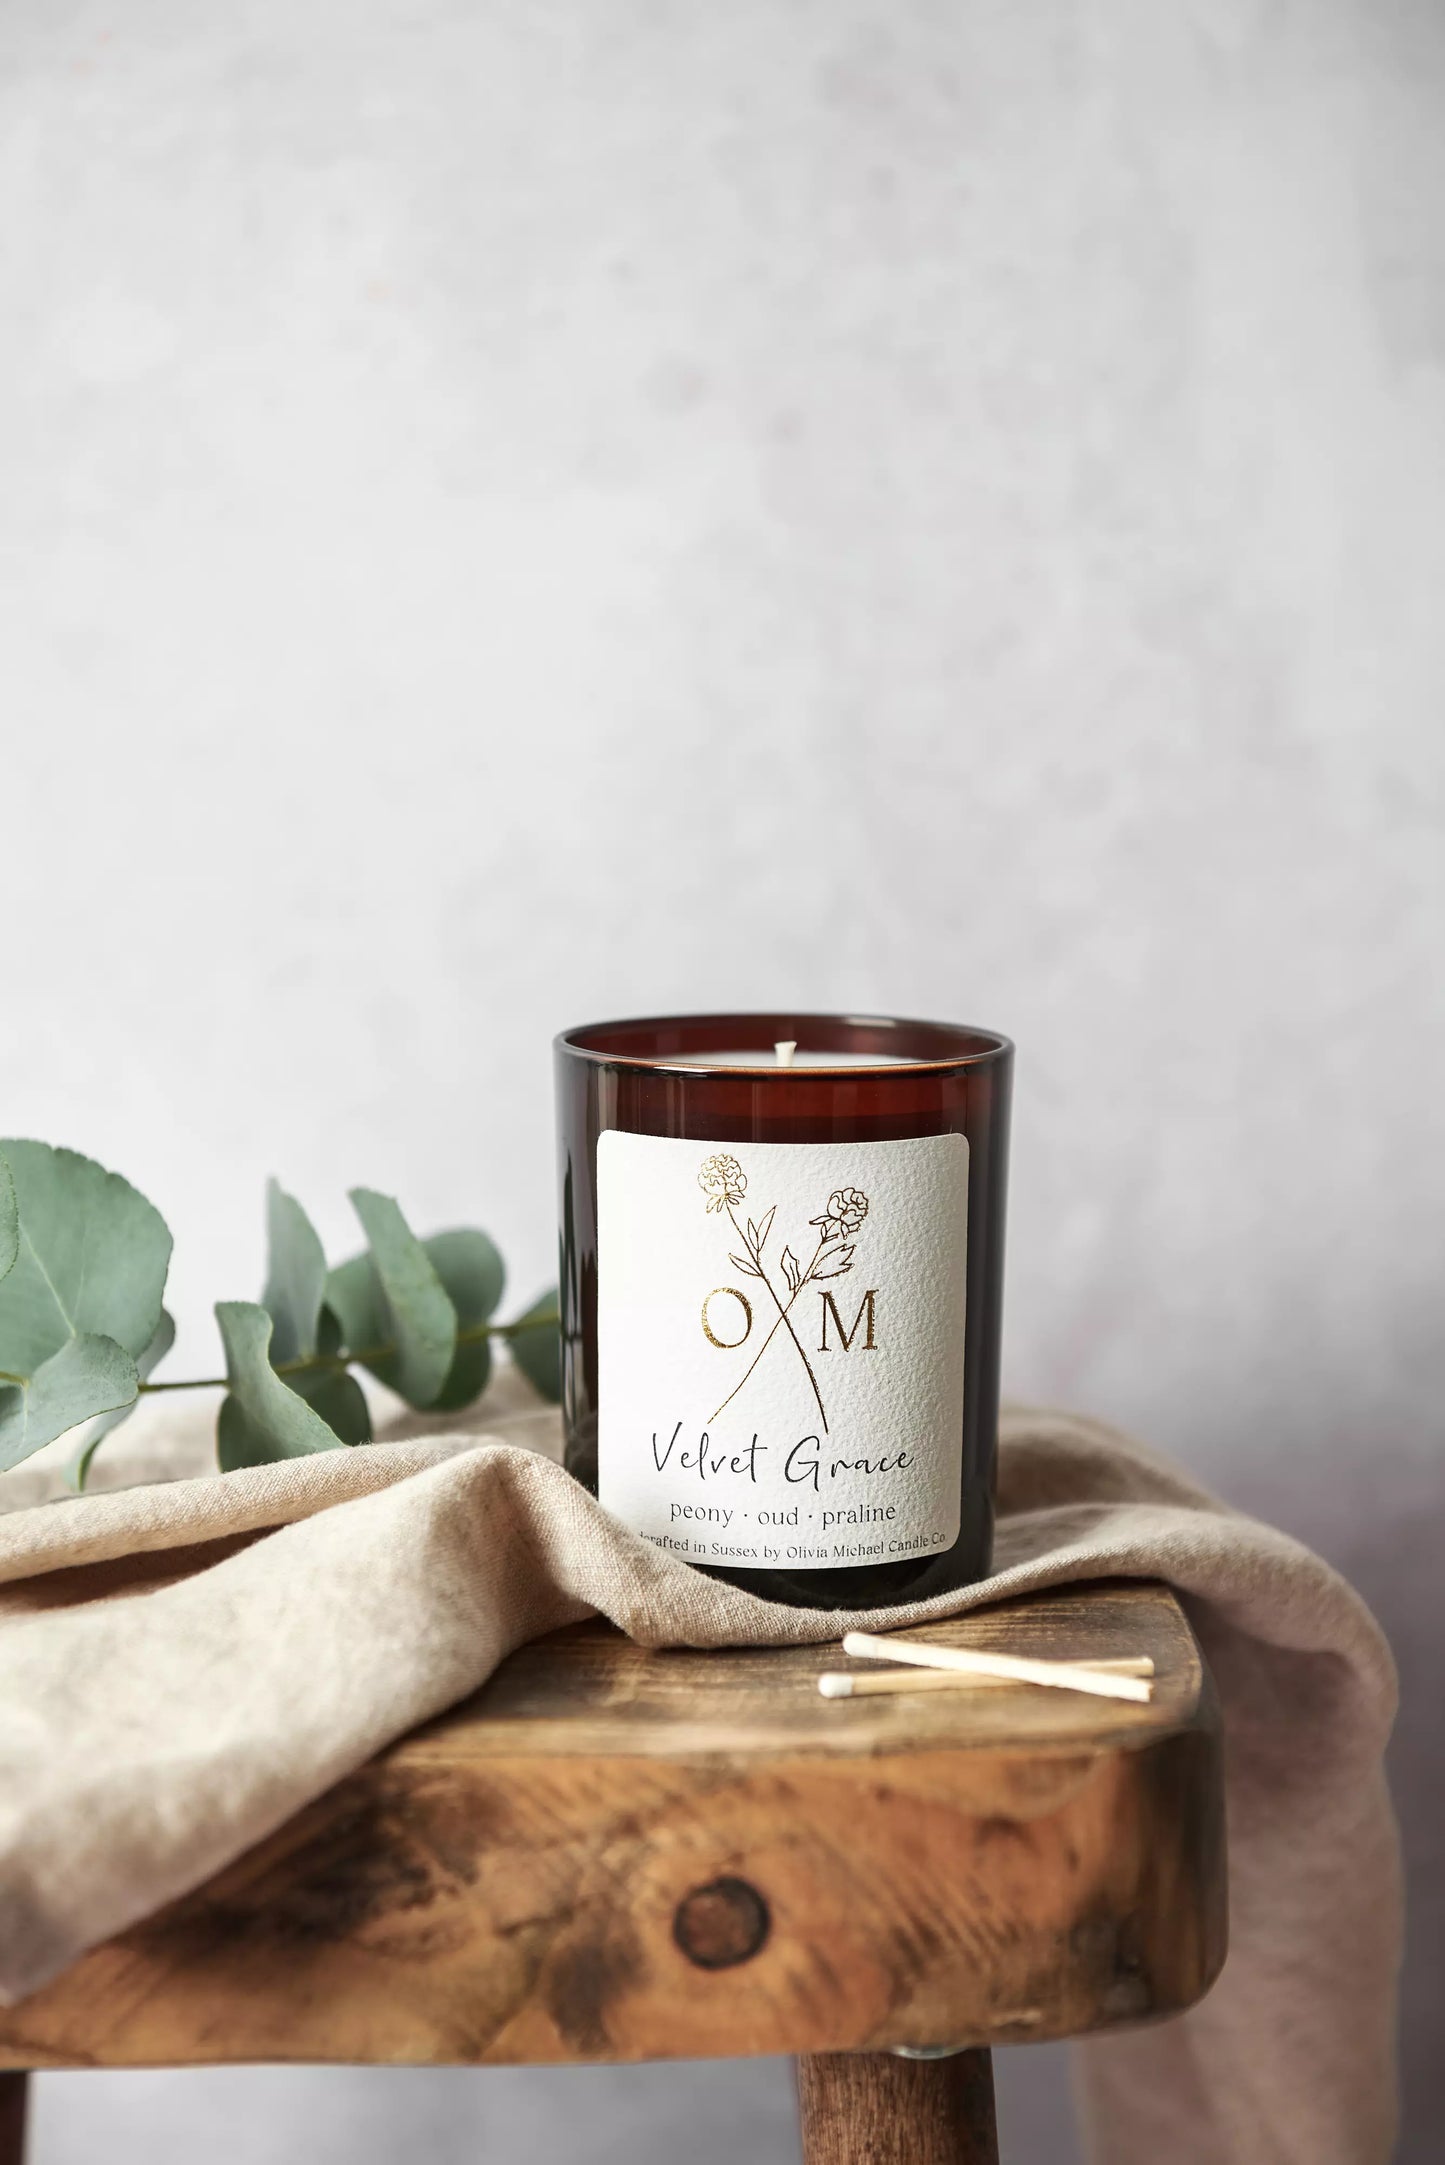 Our peony and oud scented candle is on display in an amber glass jar.